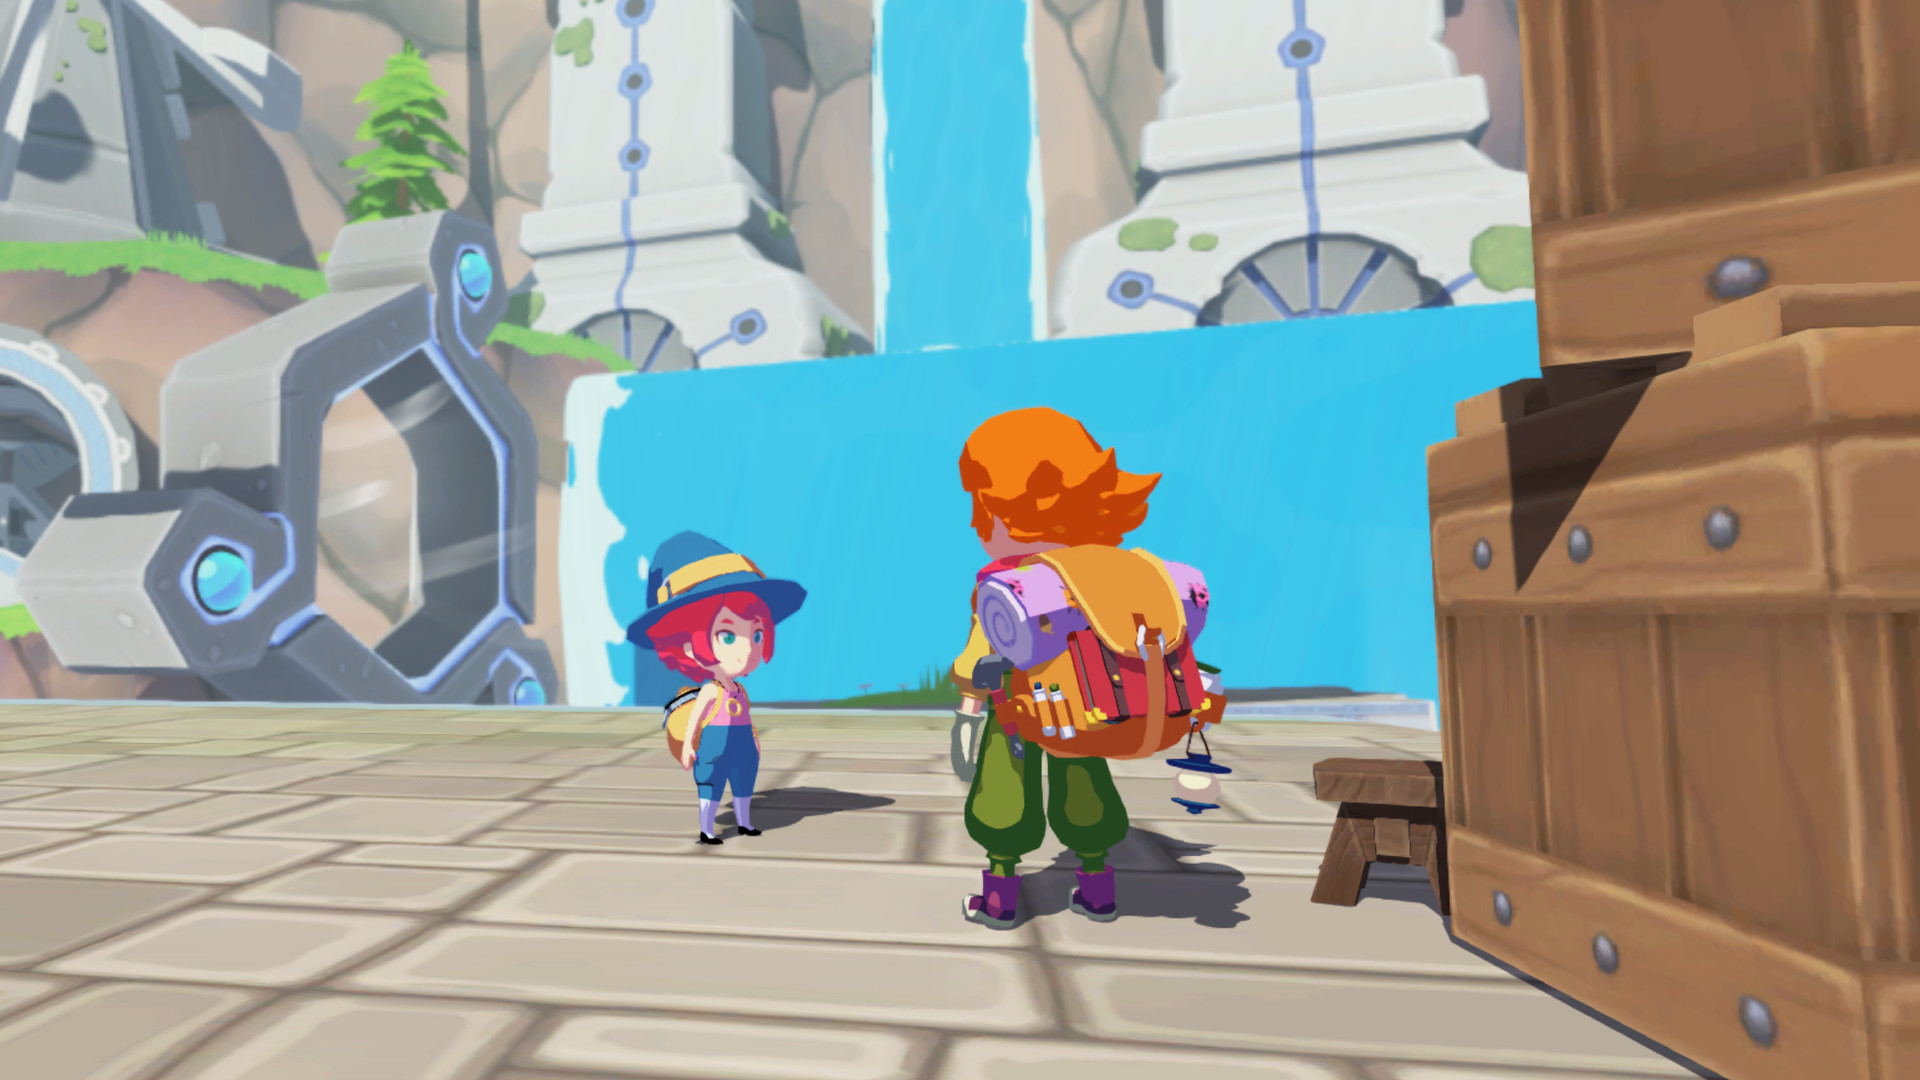 Mika talking to an adventurer with ruins and waterfall visible behind